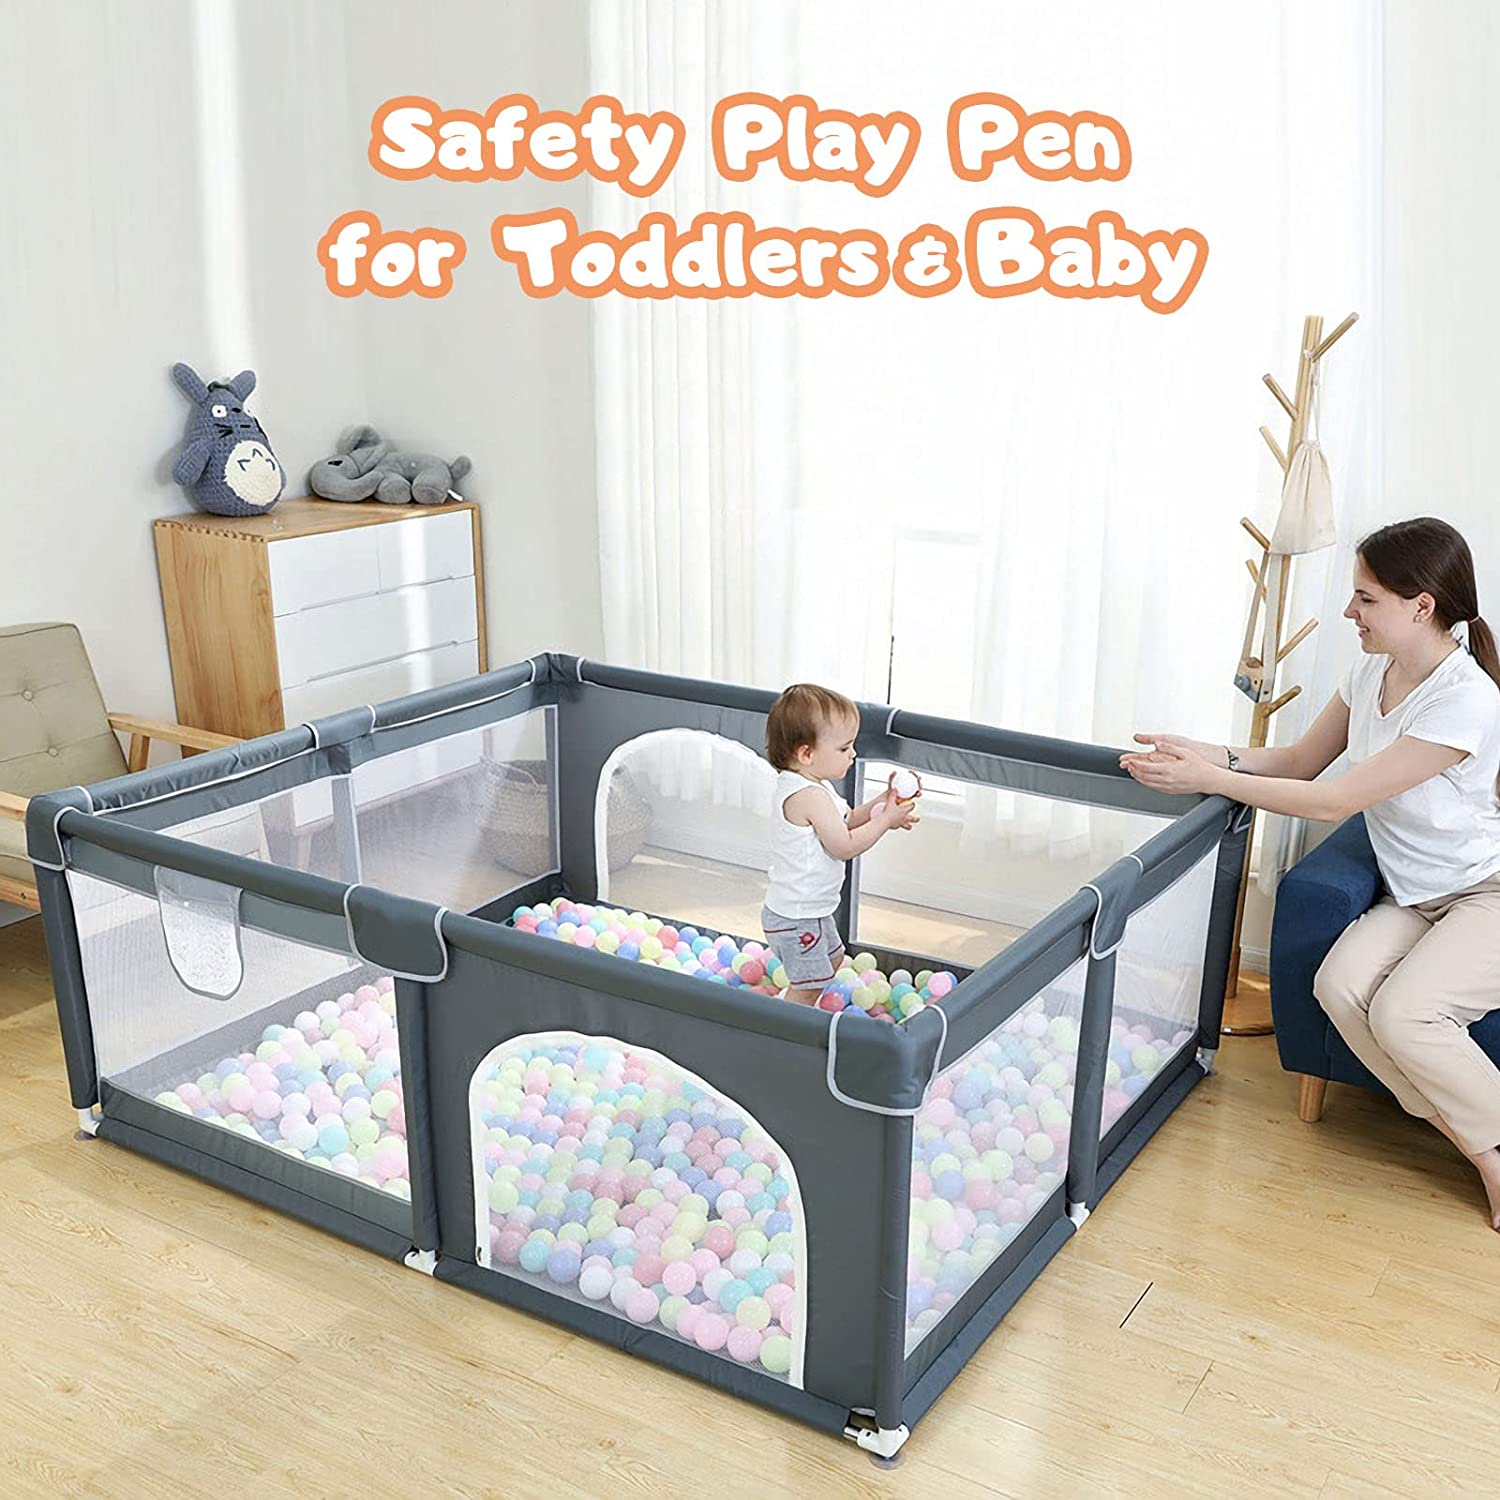 Large Baby Playpen79x71, Extra Large Play Pen For Babies And Toddlers, Play Yard With Gate, Baby Fence With Breathable Mesh, Safety Indoor & Outdoor Activity Center Grey